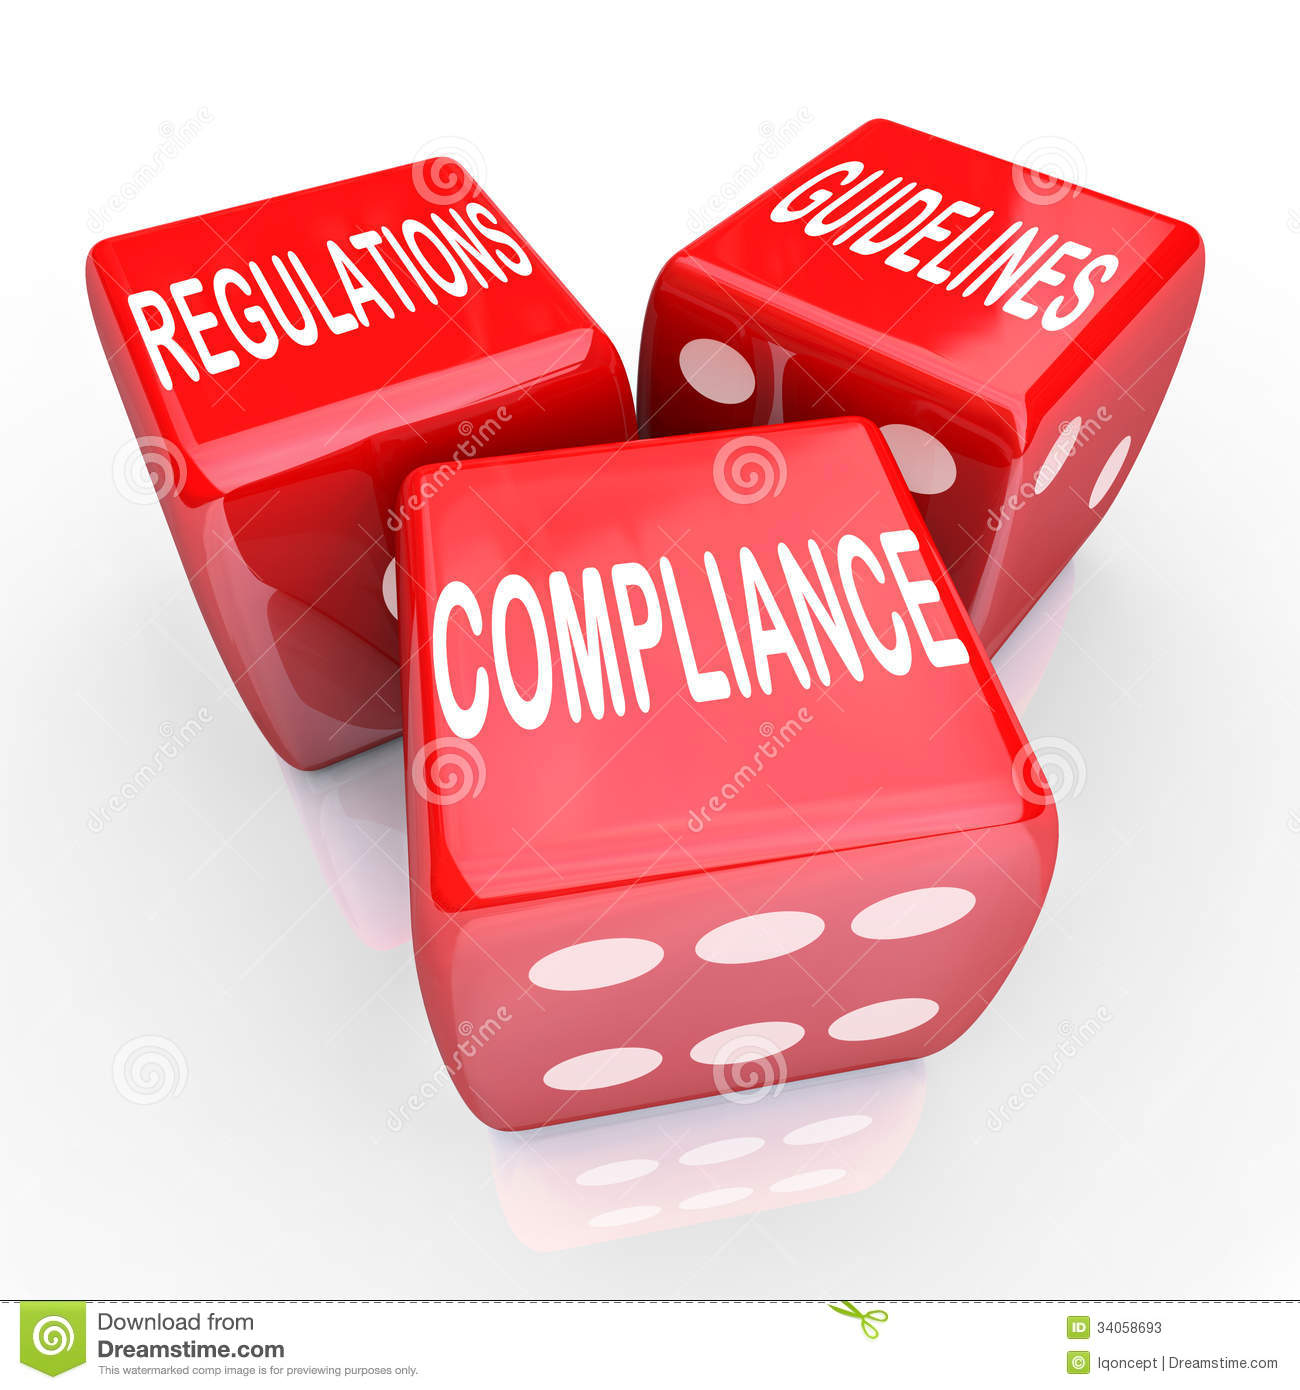 The Words Compliance Regulations And Guidelines On Three Red Dice To